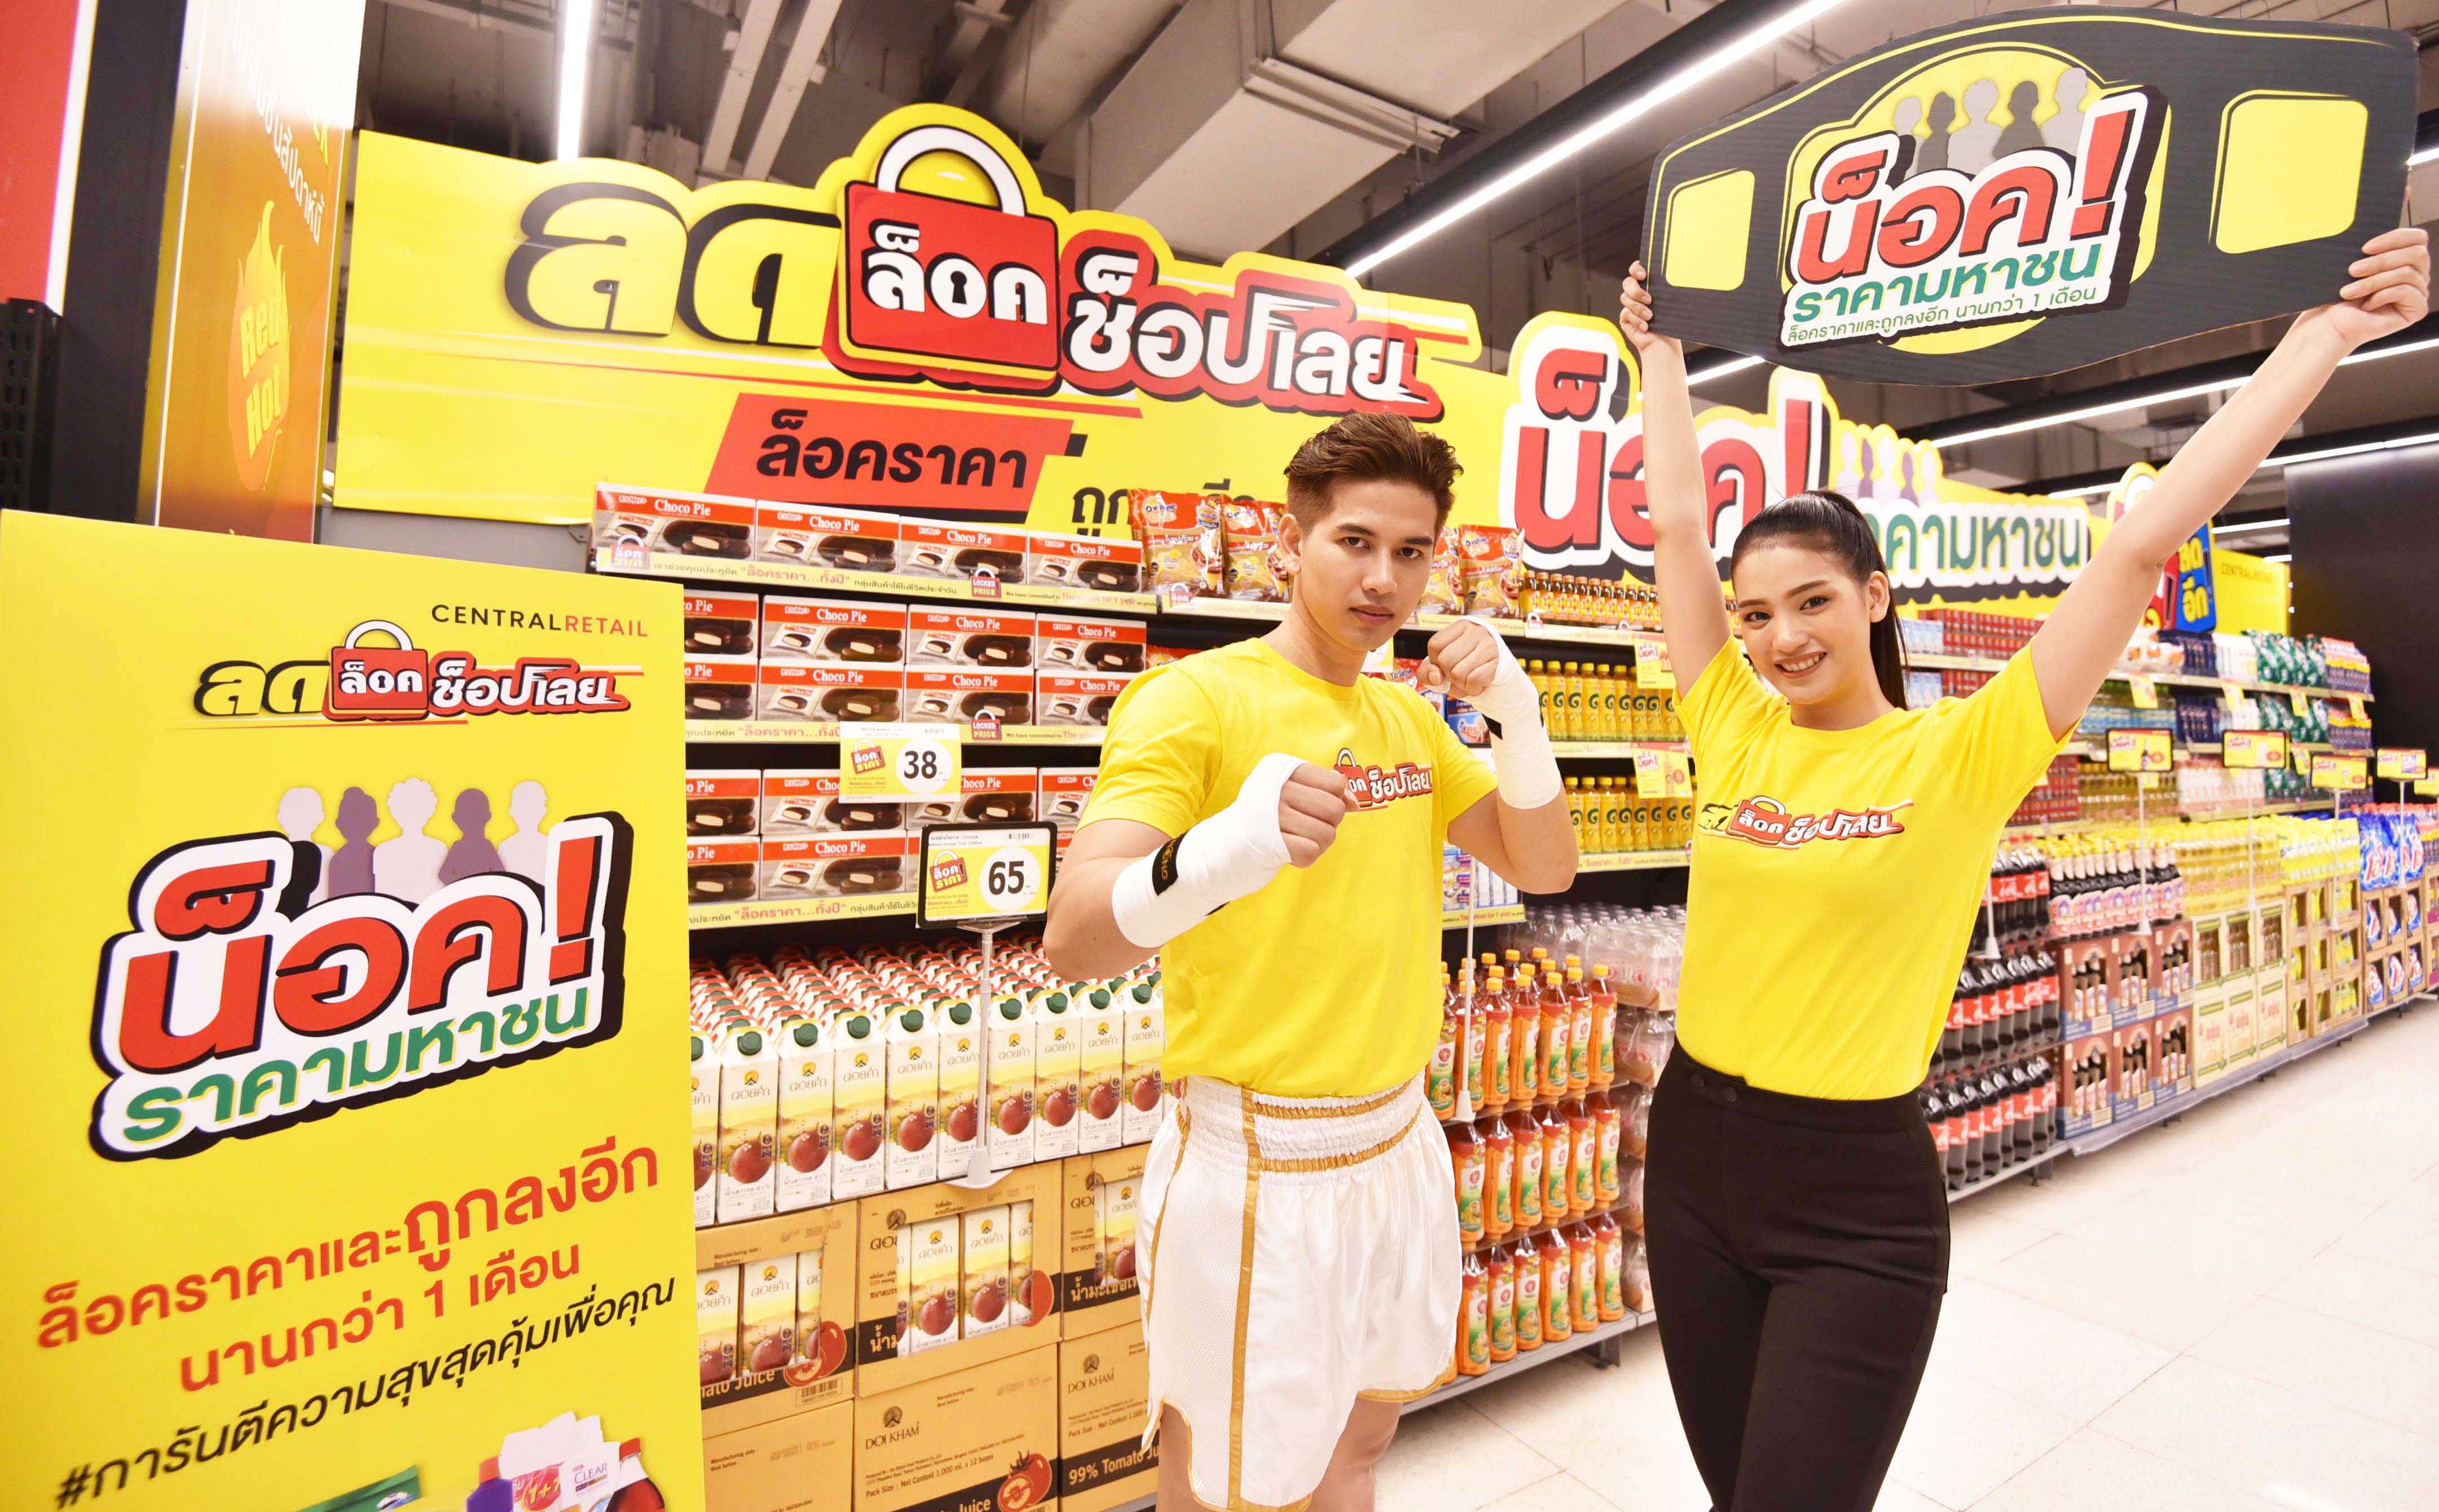 Tops shakes up retail again with Lod, Lock, Shop Loei Stronger-than-ever campaign of pegging and cutting prices for over a month